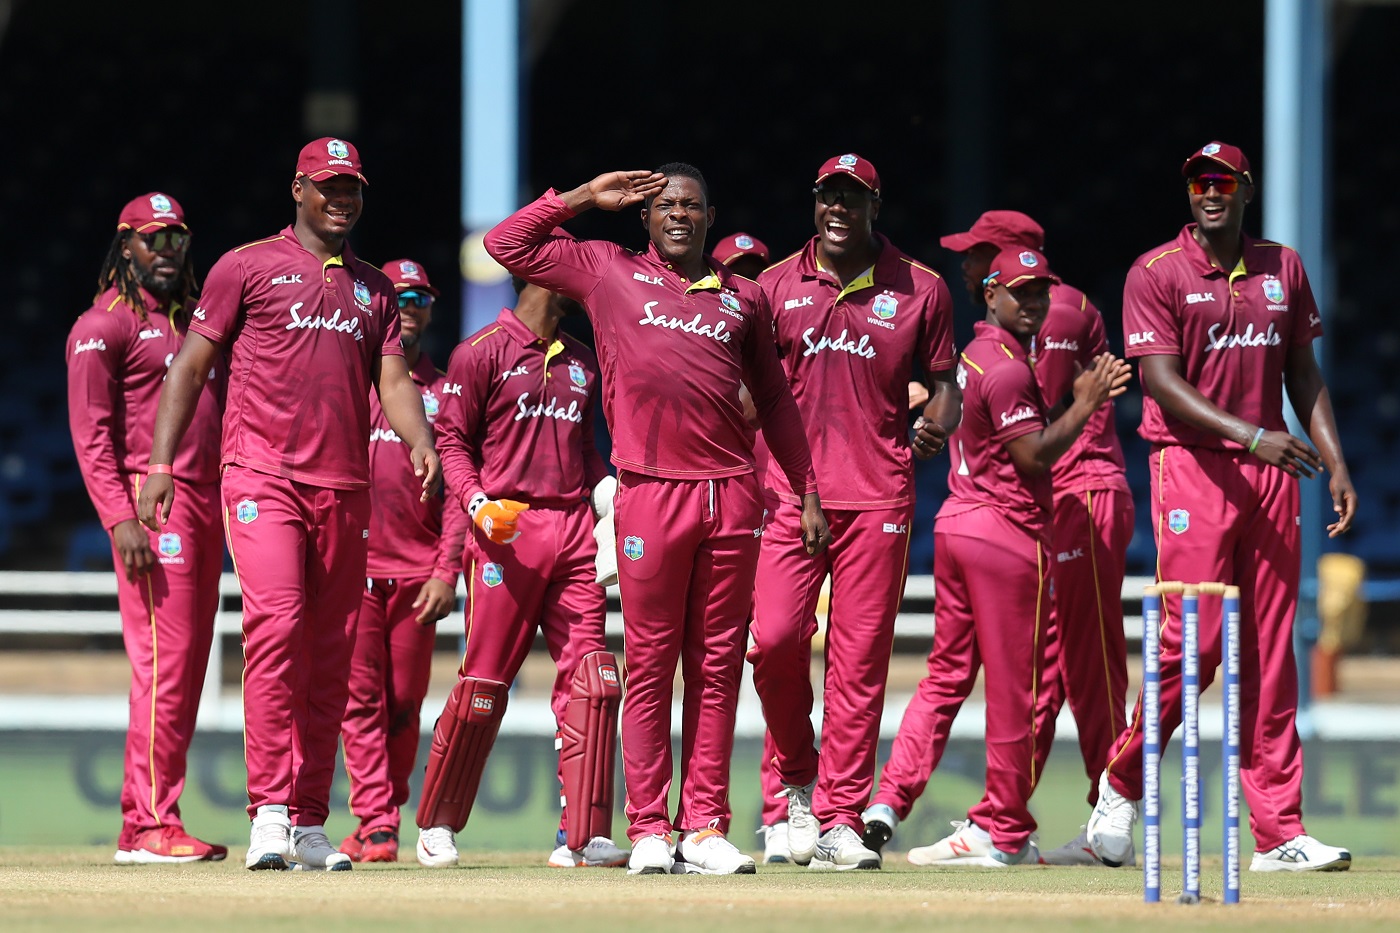 IRE vs WI 2022 | ODI 1 of 3 | Complete details